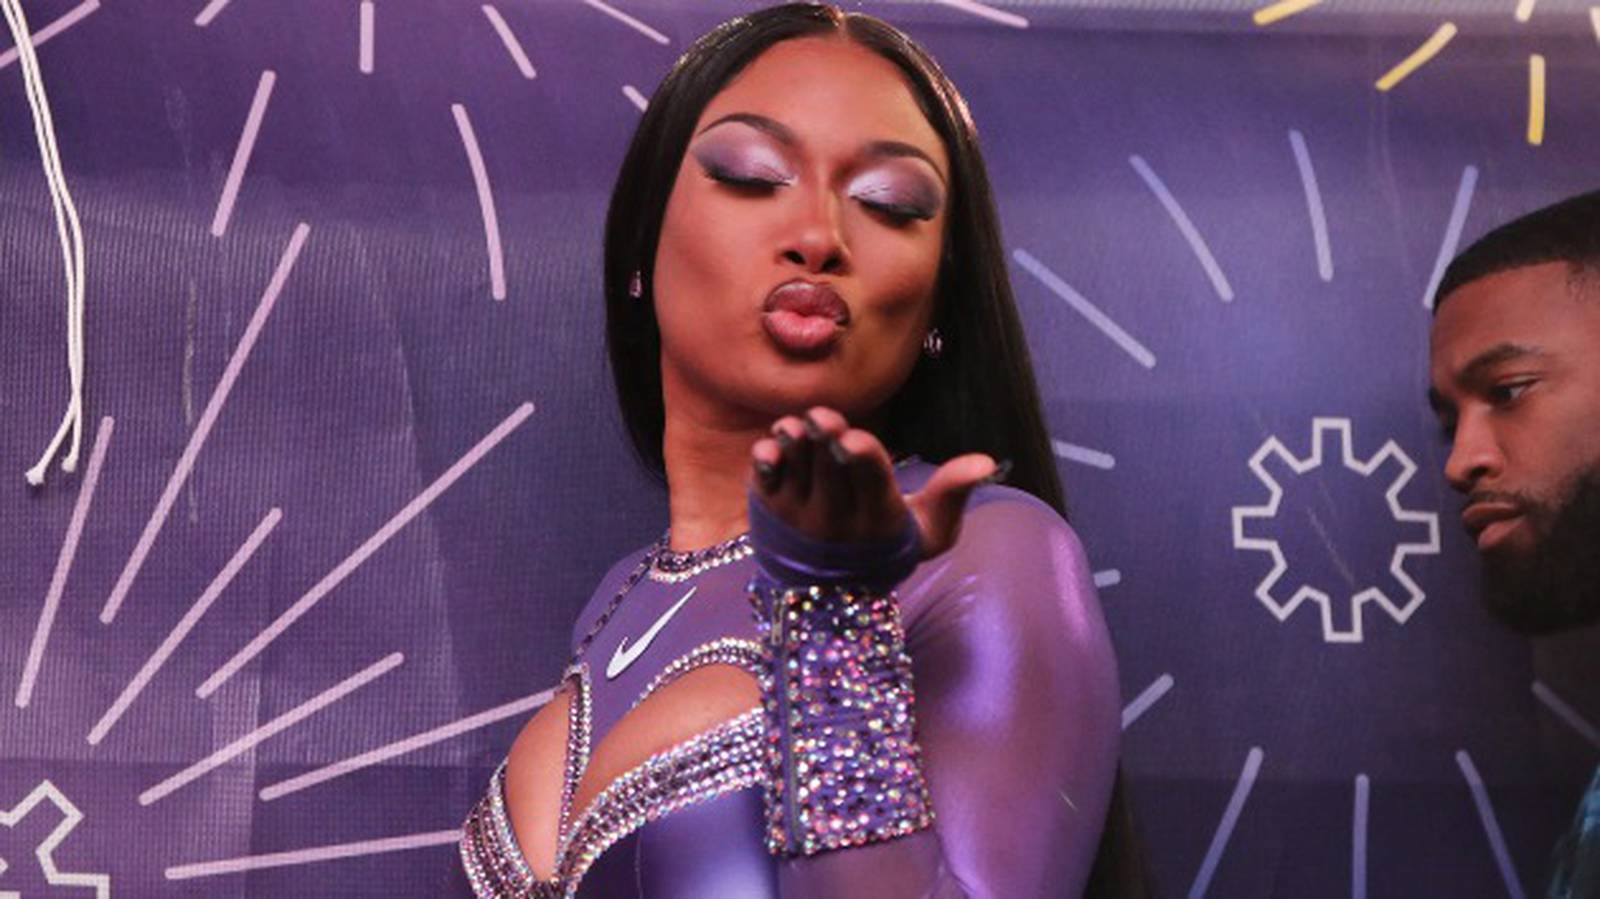 Megan Thee Stallion's Hot Girl Summer Tour is to a city near